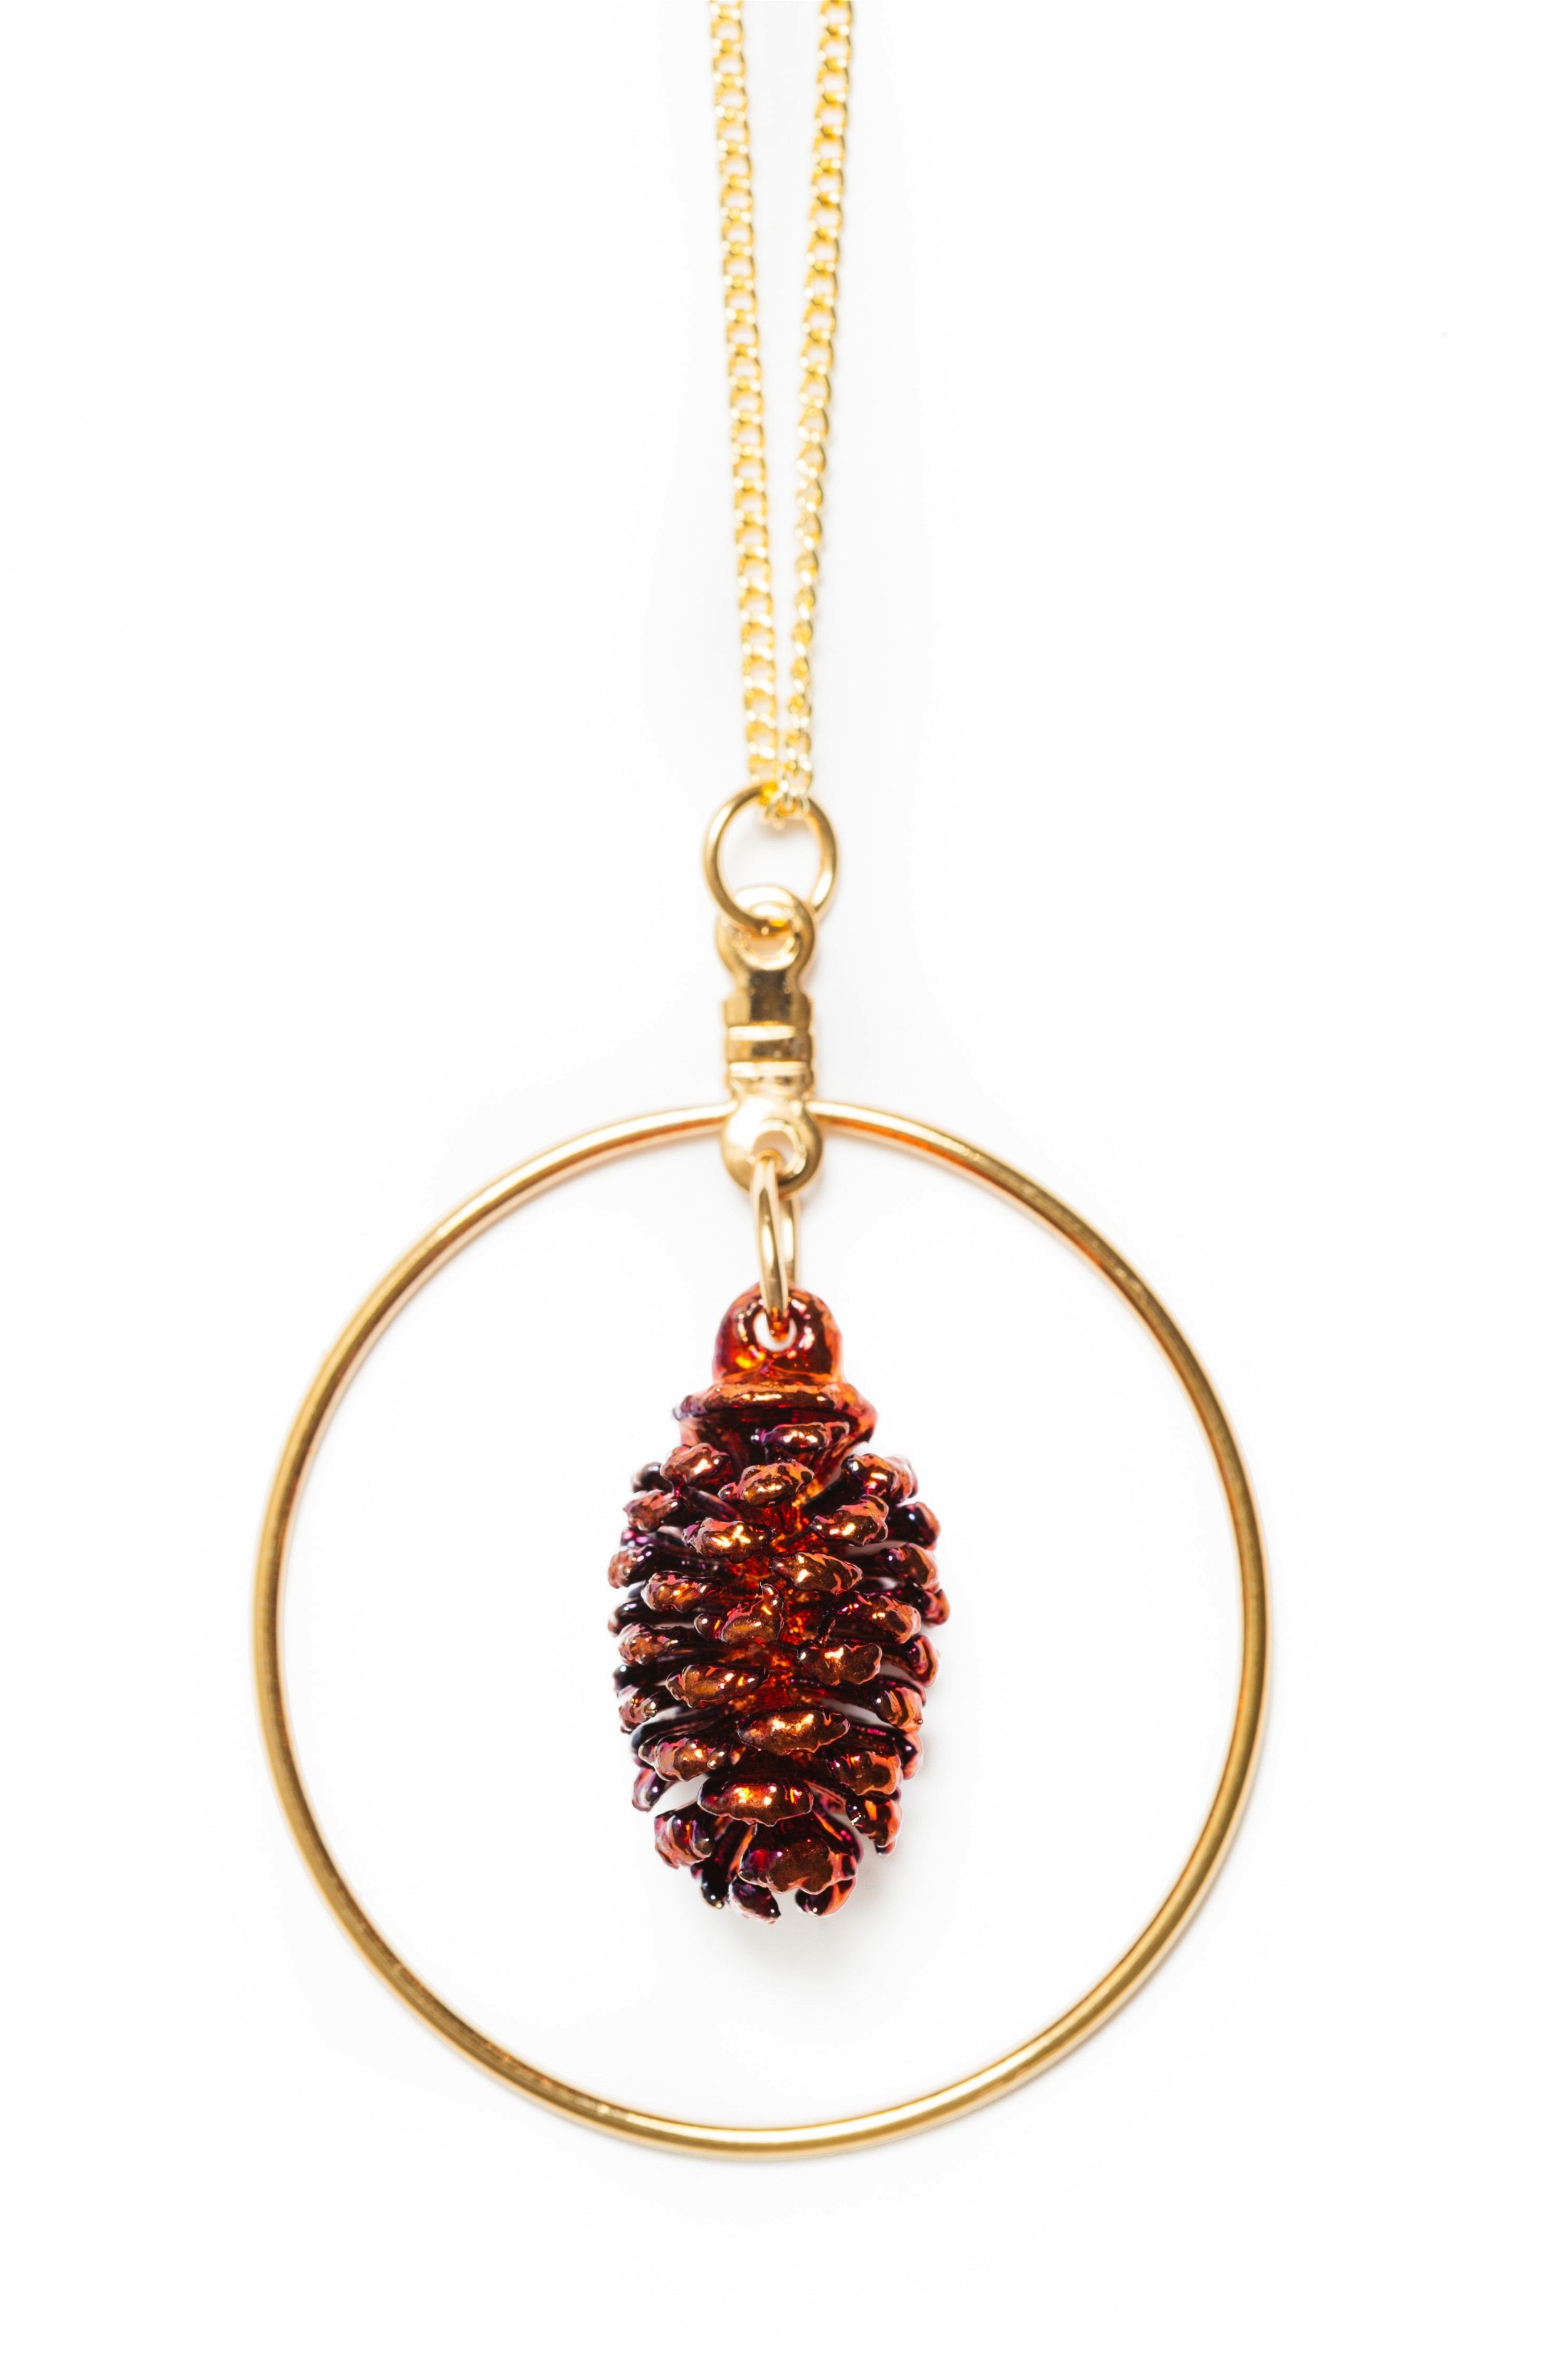 How To Make A Pinecone Pendant EXTENDED VERSION - YouTube